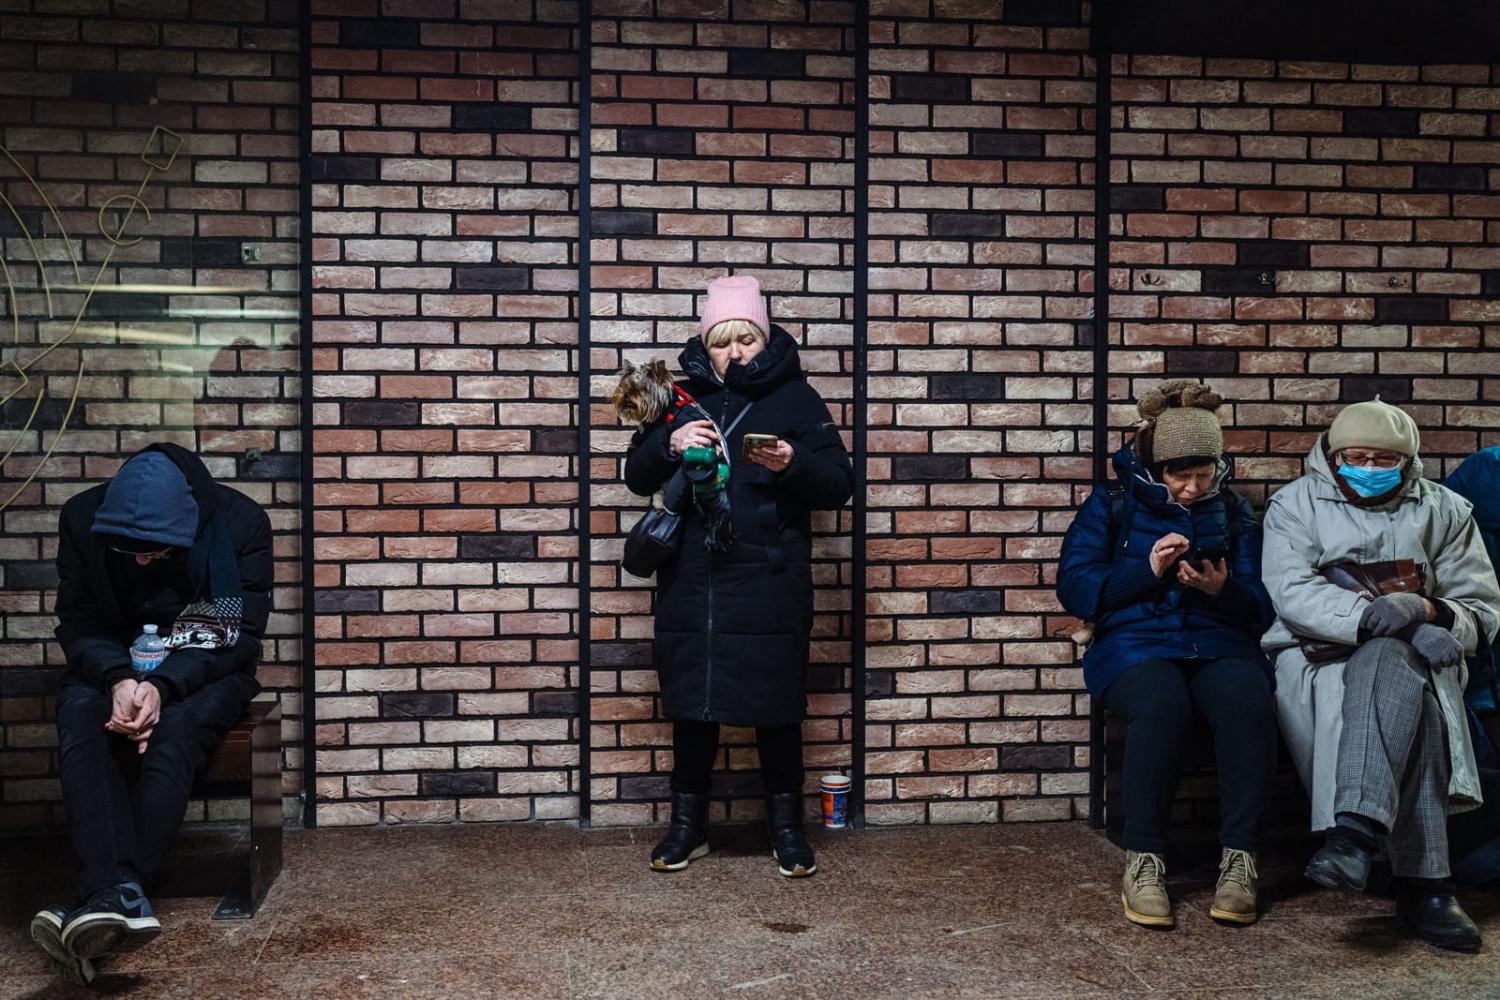 Civilians take shelter in an underground passage during an airstrike alert in the centre of Kyiv on 5 December amid the Russian invasion of Ukraine (Dimitar Dilkoff/AFP via Getty Images)